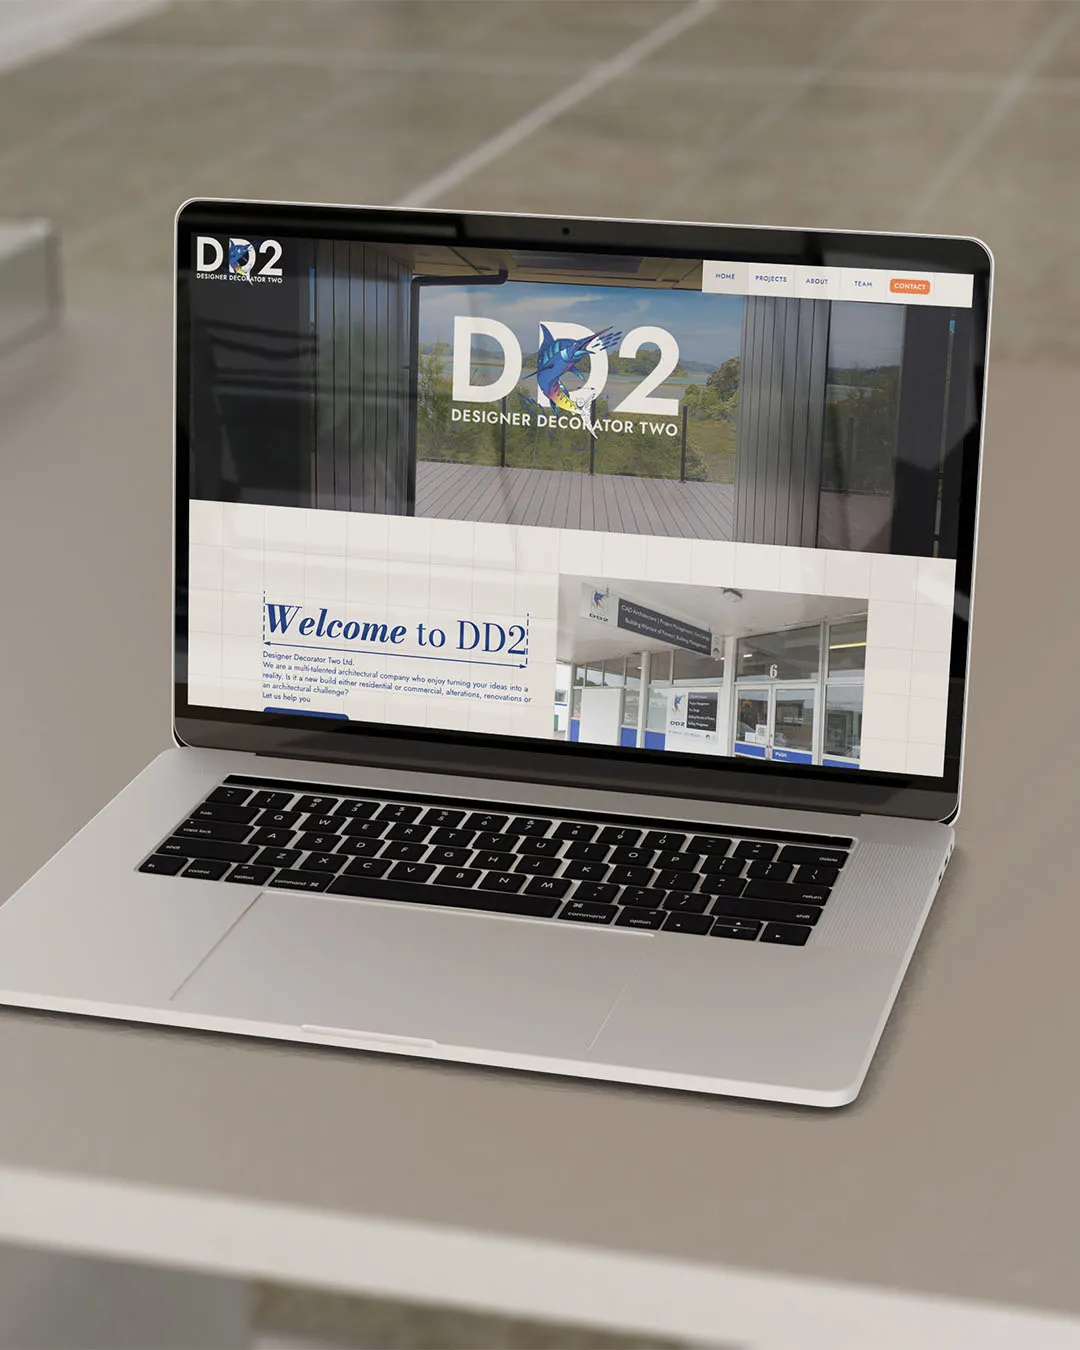 The DD2 website displayed on a MacBook pro